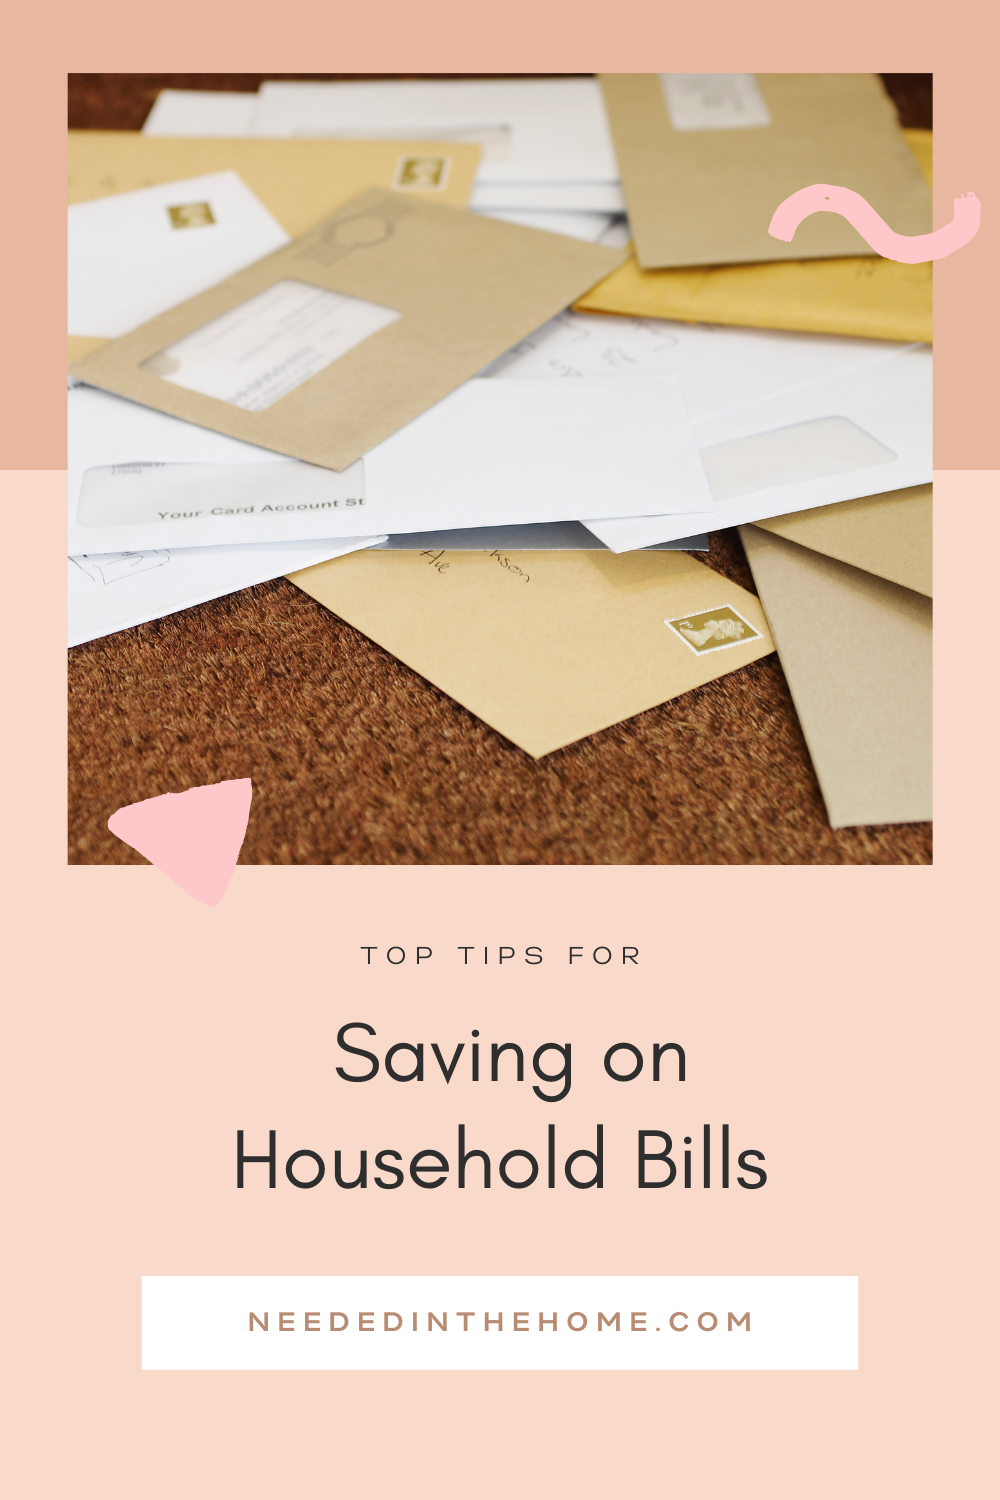 pinterest-pin-description top tips for saving on household bills mail post letters invoices neededinthehome